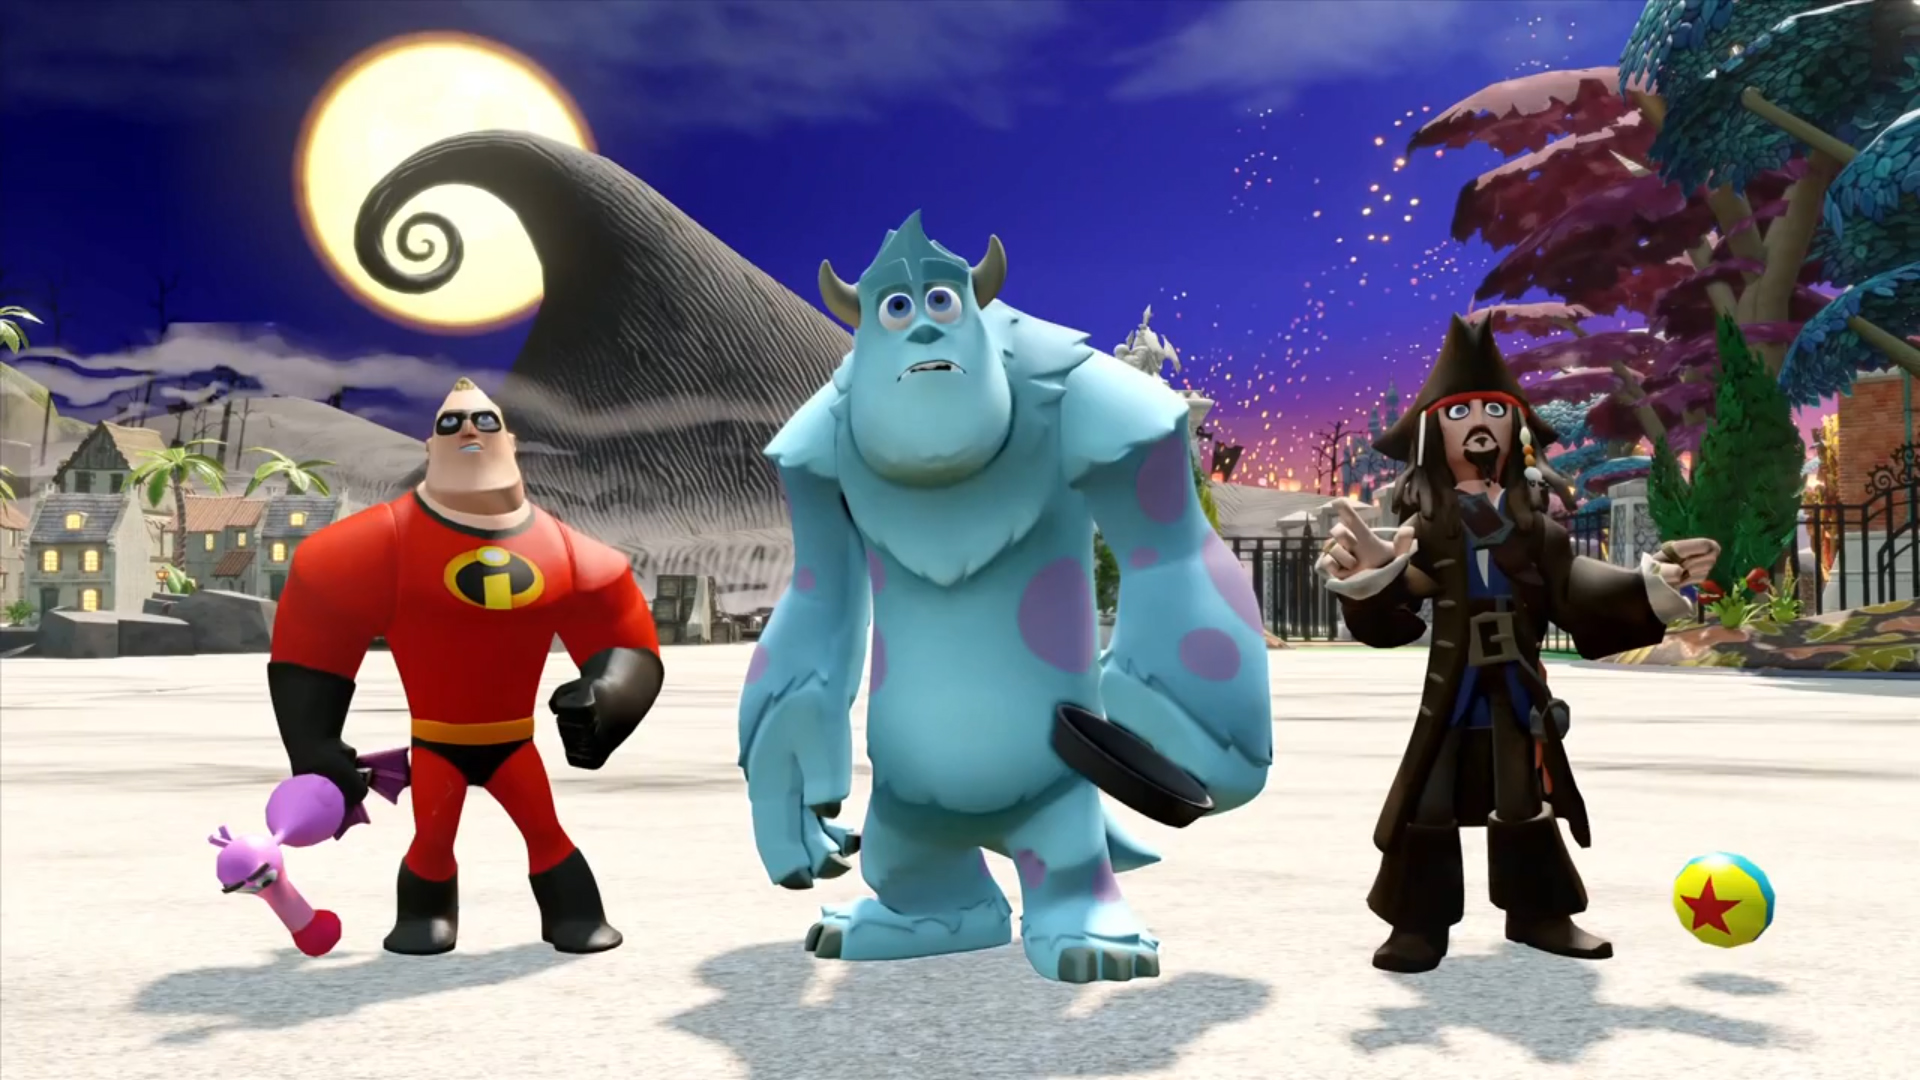 Disney Infinity to include Star Wars and Marvel characters?